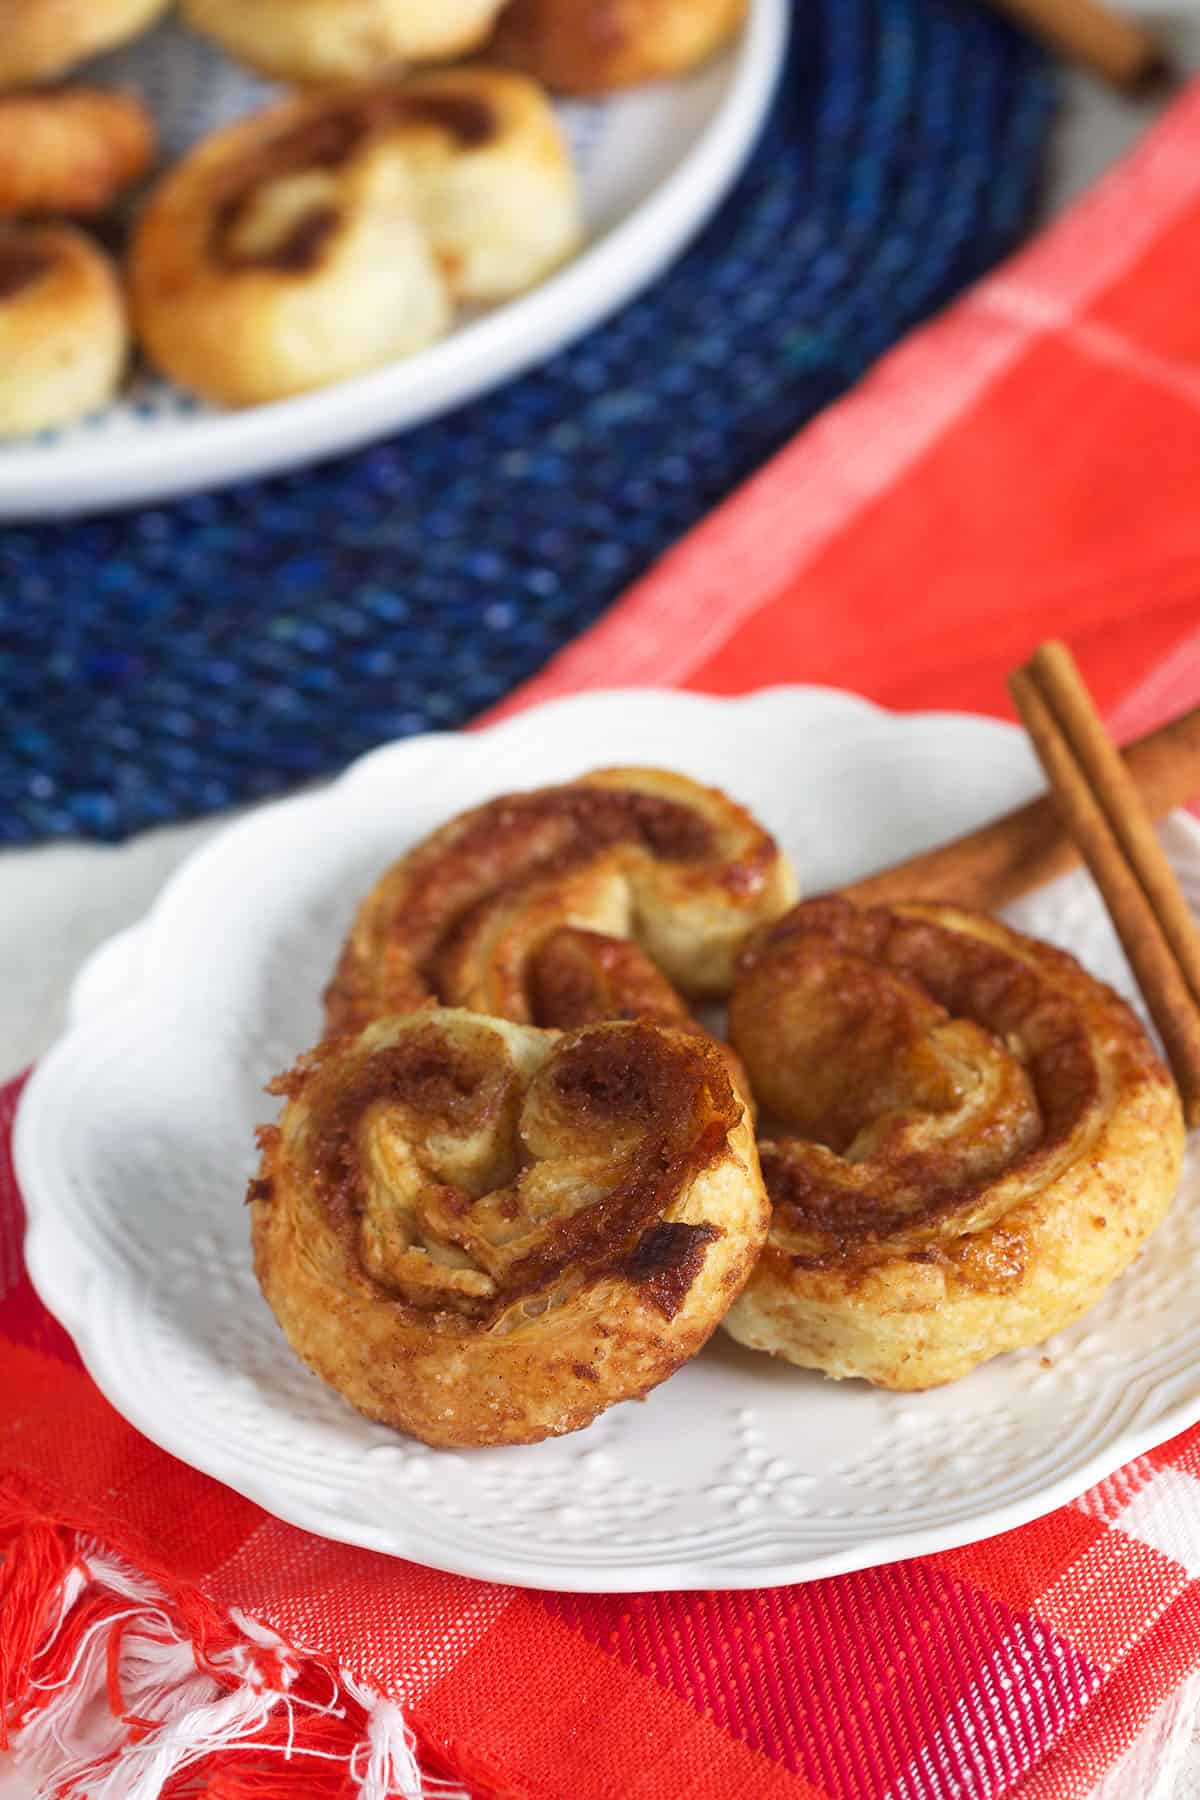 Three palmiers are placed on a small white plate.